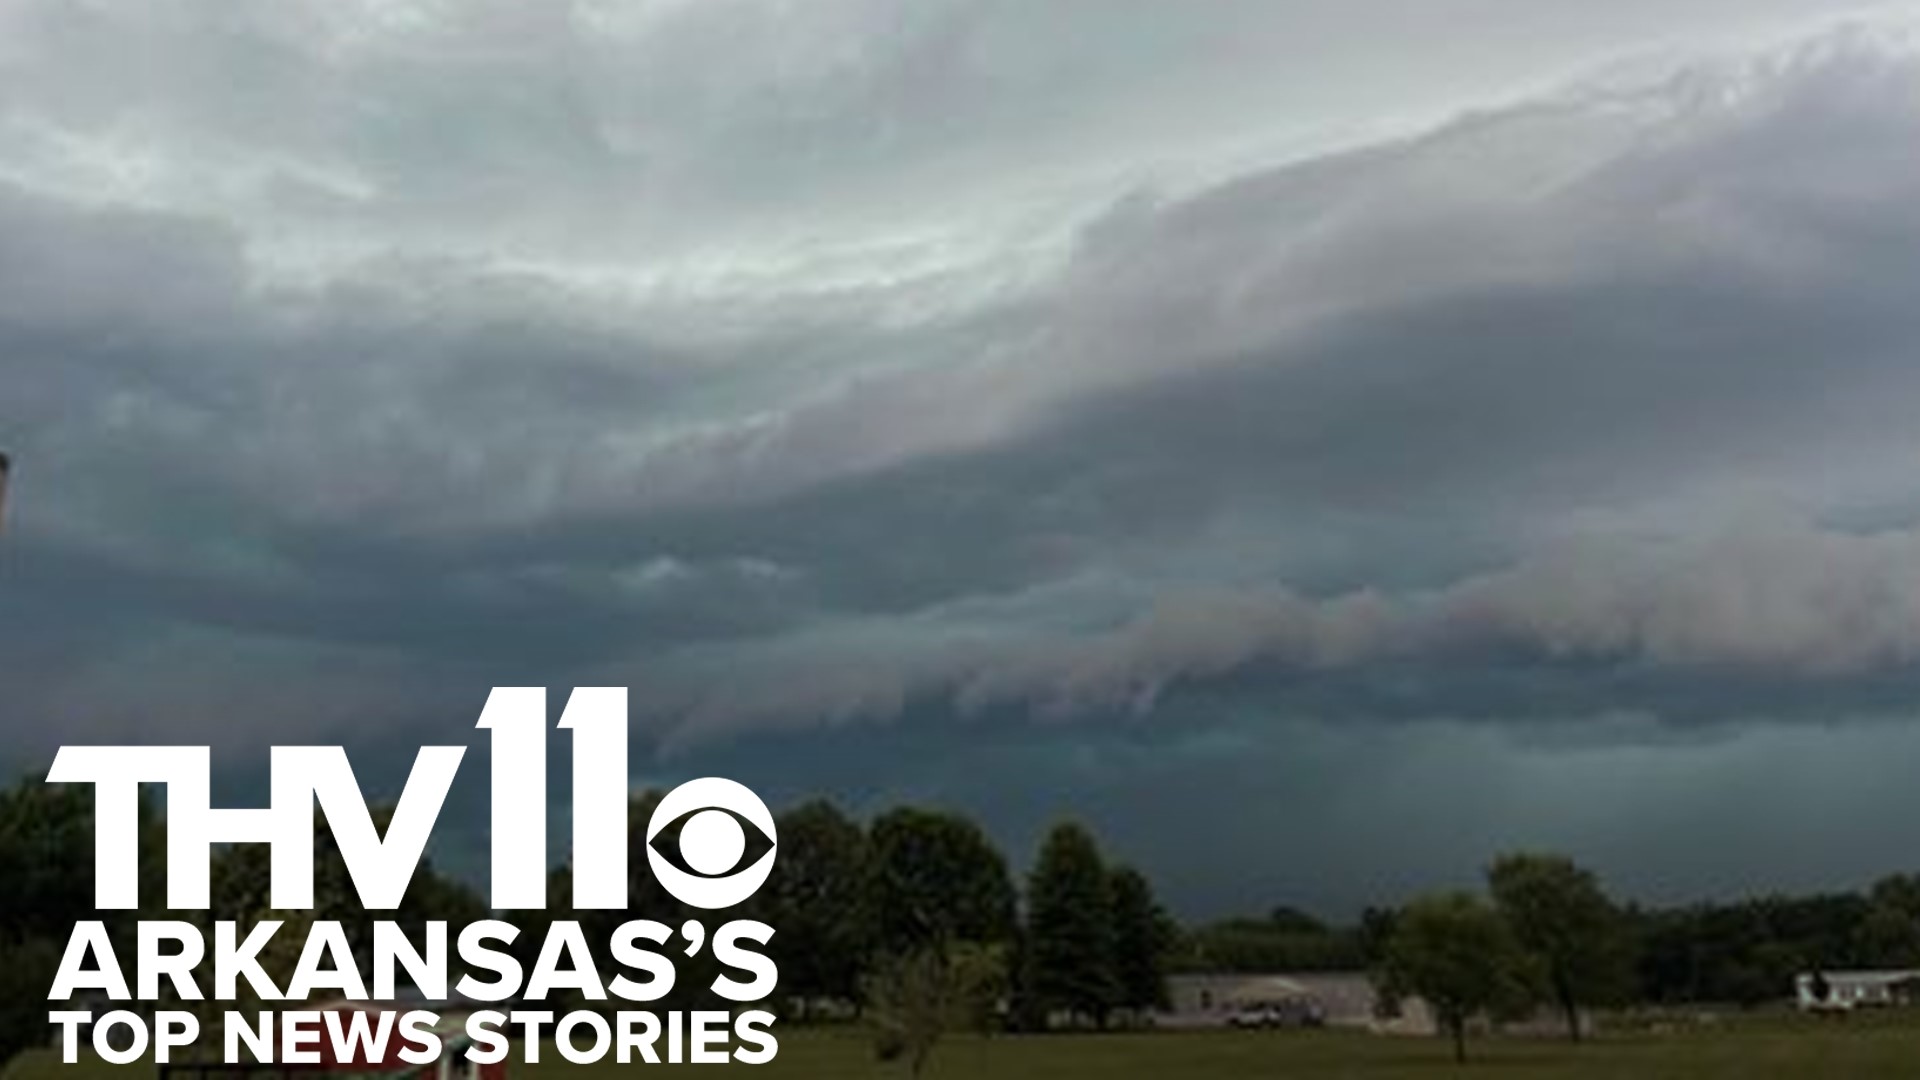 Sarah Horbacewicz presents Arkansas's top news stories for June 25, 2023, including what happened as severe storms rolled through Central Arkansas.